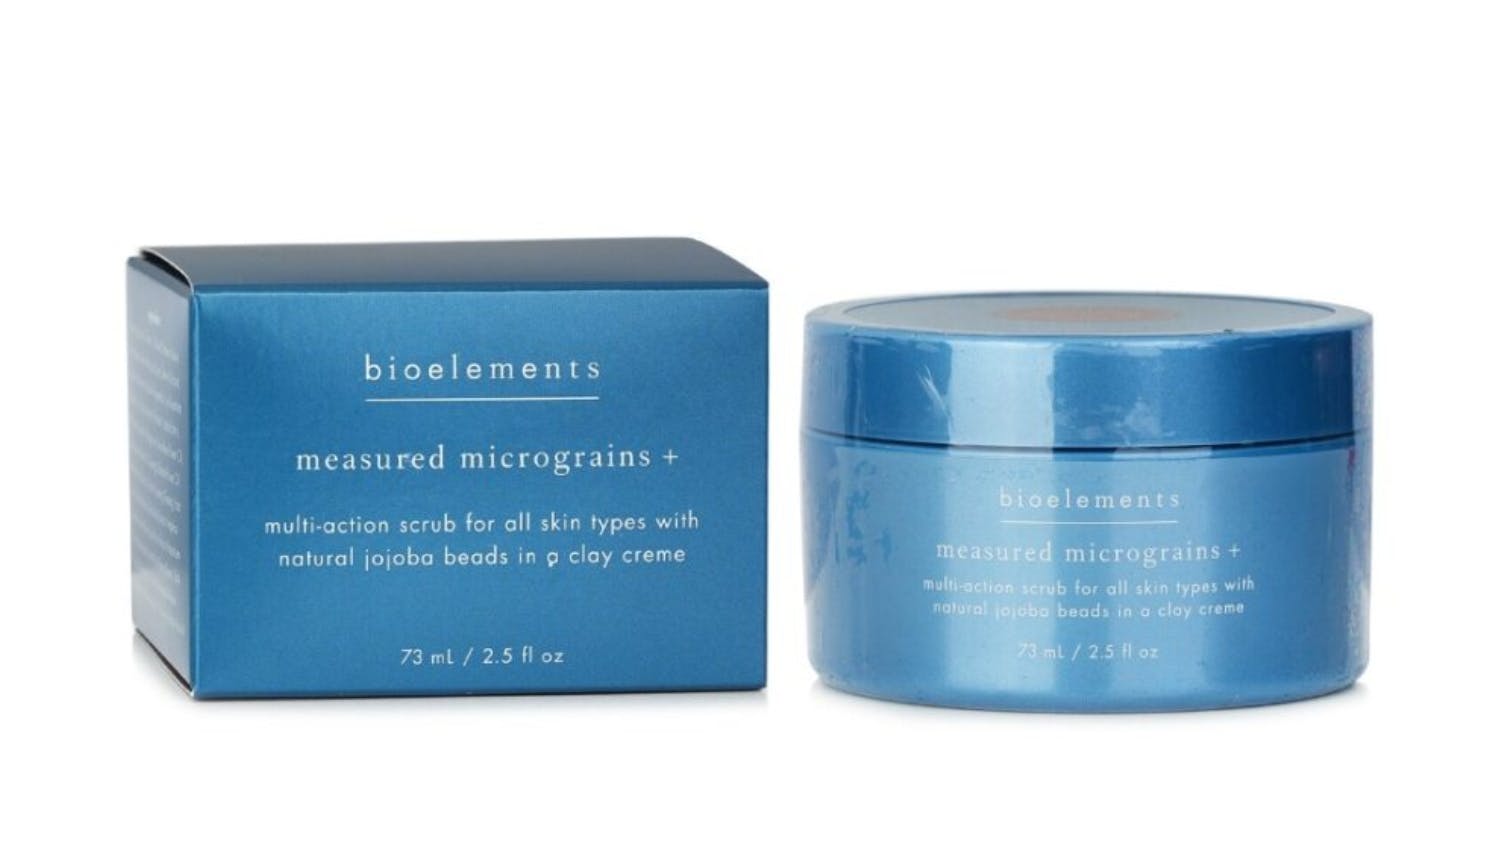 Bioelements Measured Micrograins - Gentle Buffing Facial Scrub (For All Skin Types) TH116 - 73ml/2.5oz